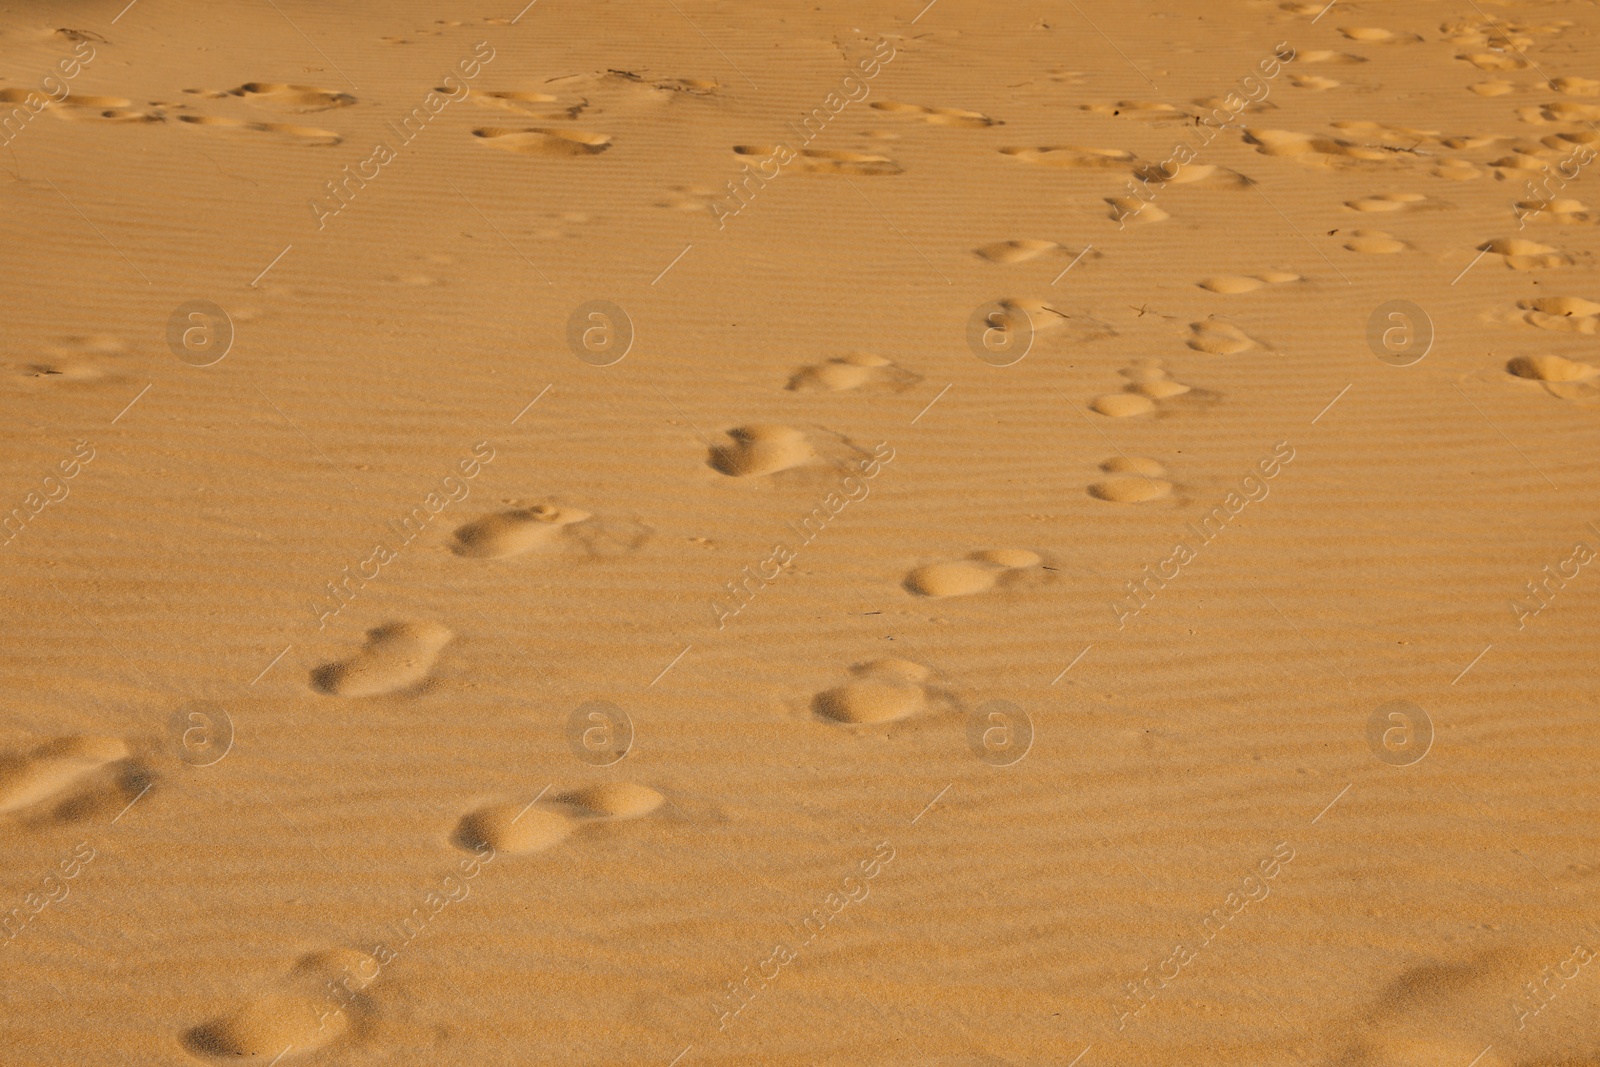 Photo of Trail of footprints on sand in desert